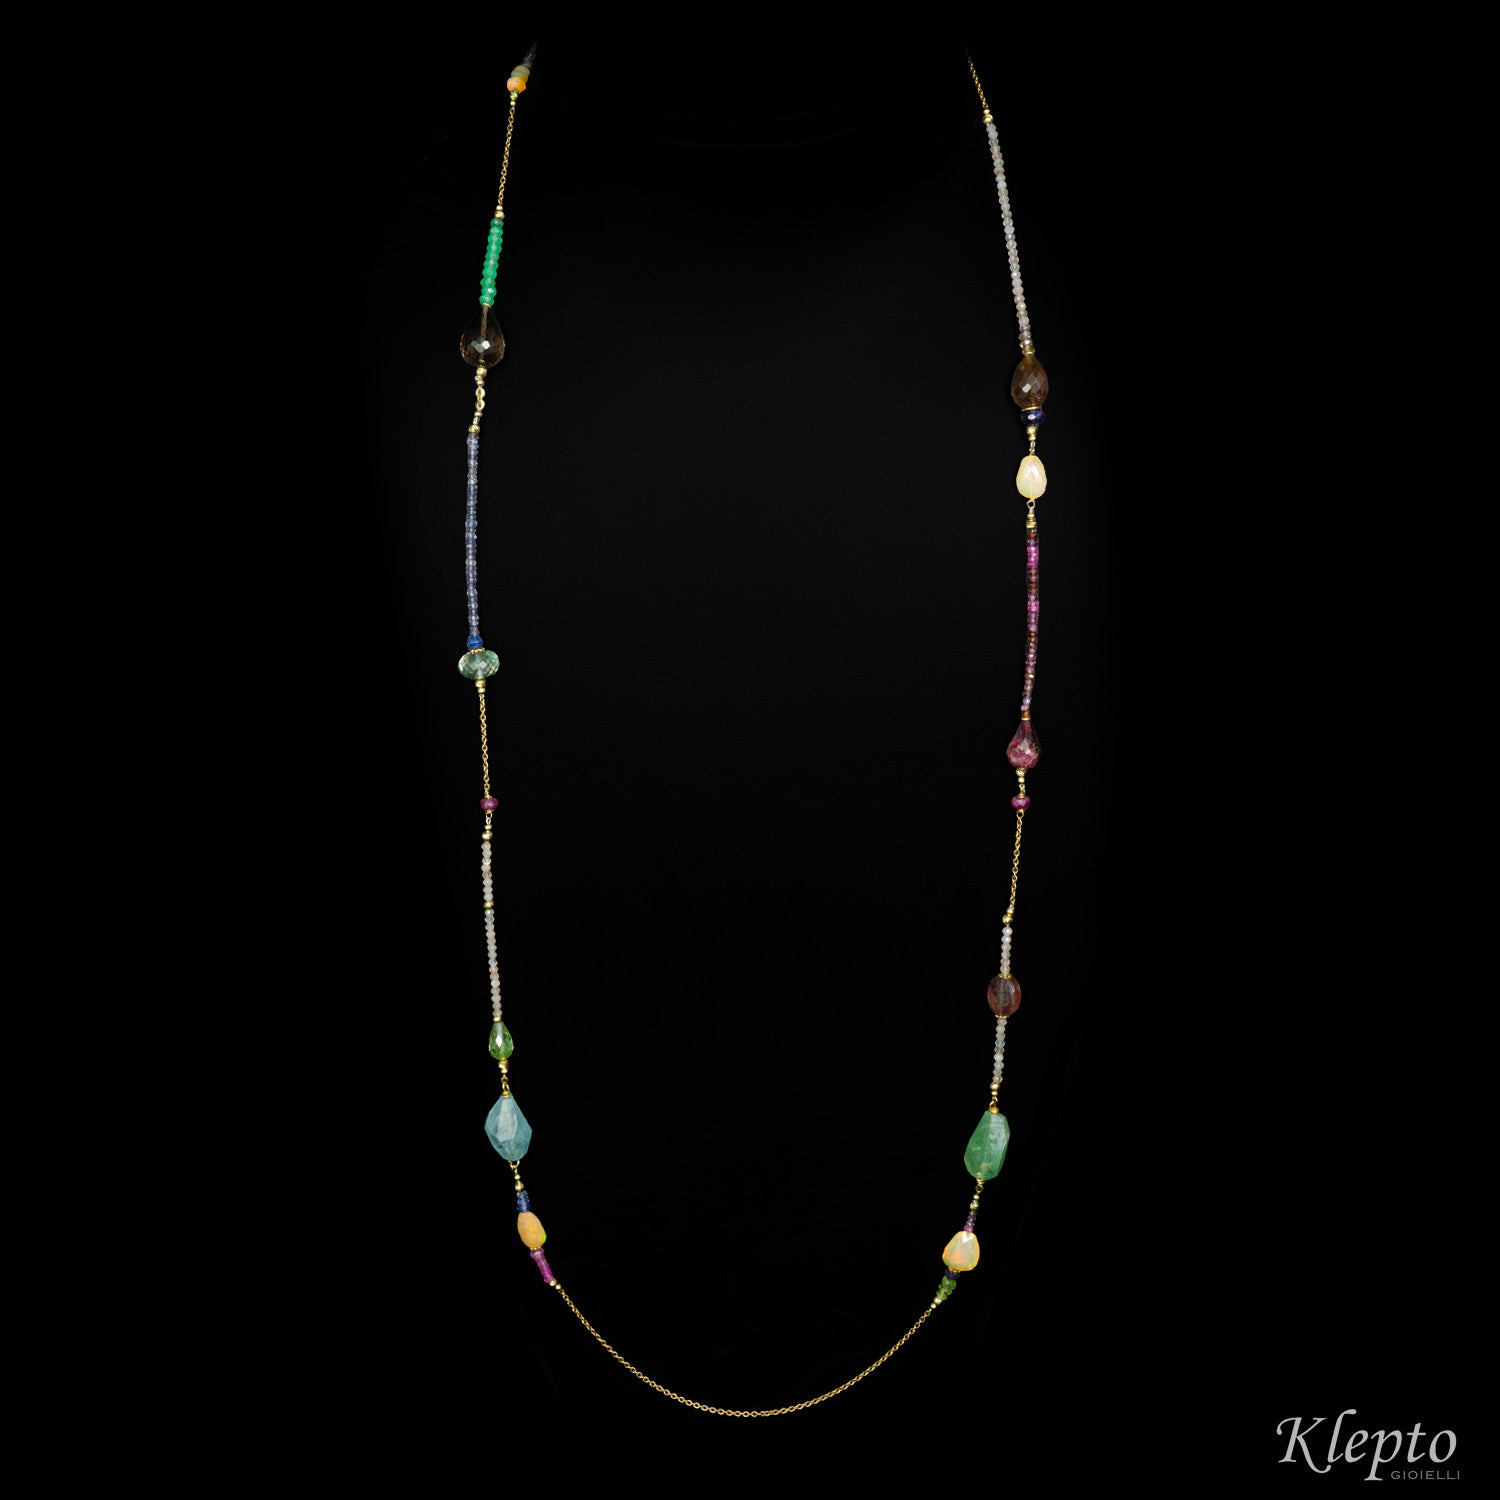 "Chanel" style Rainbow necklace in yellow gold and stones